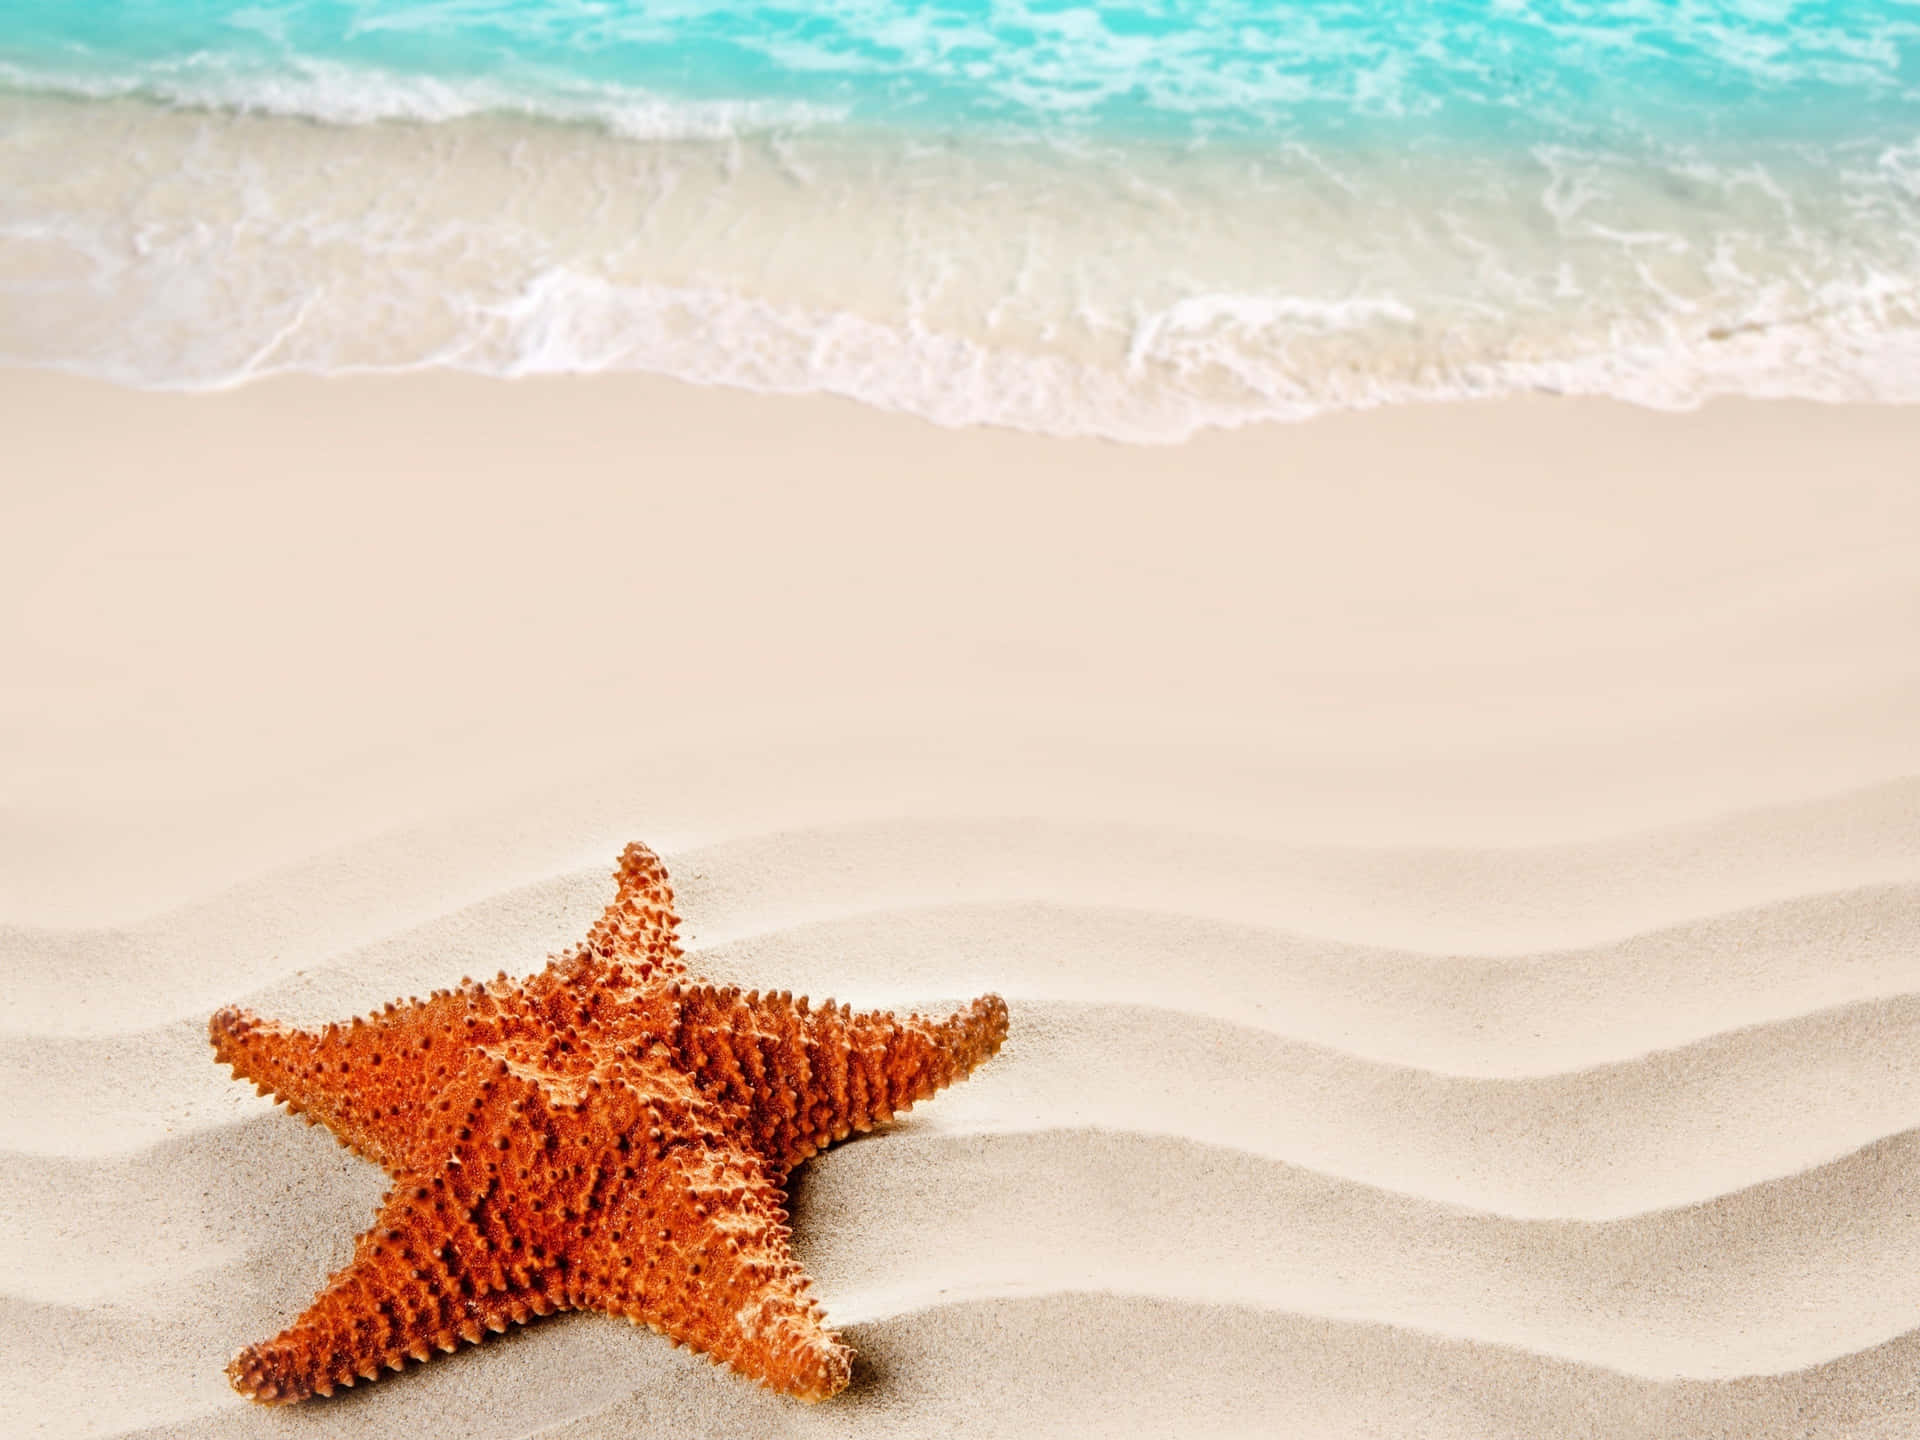 A Starfish Gently Moving Through The Waves of The Ocean